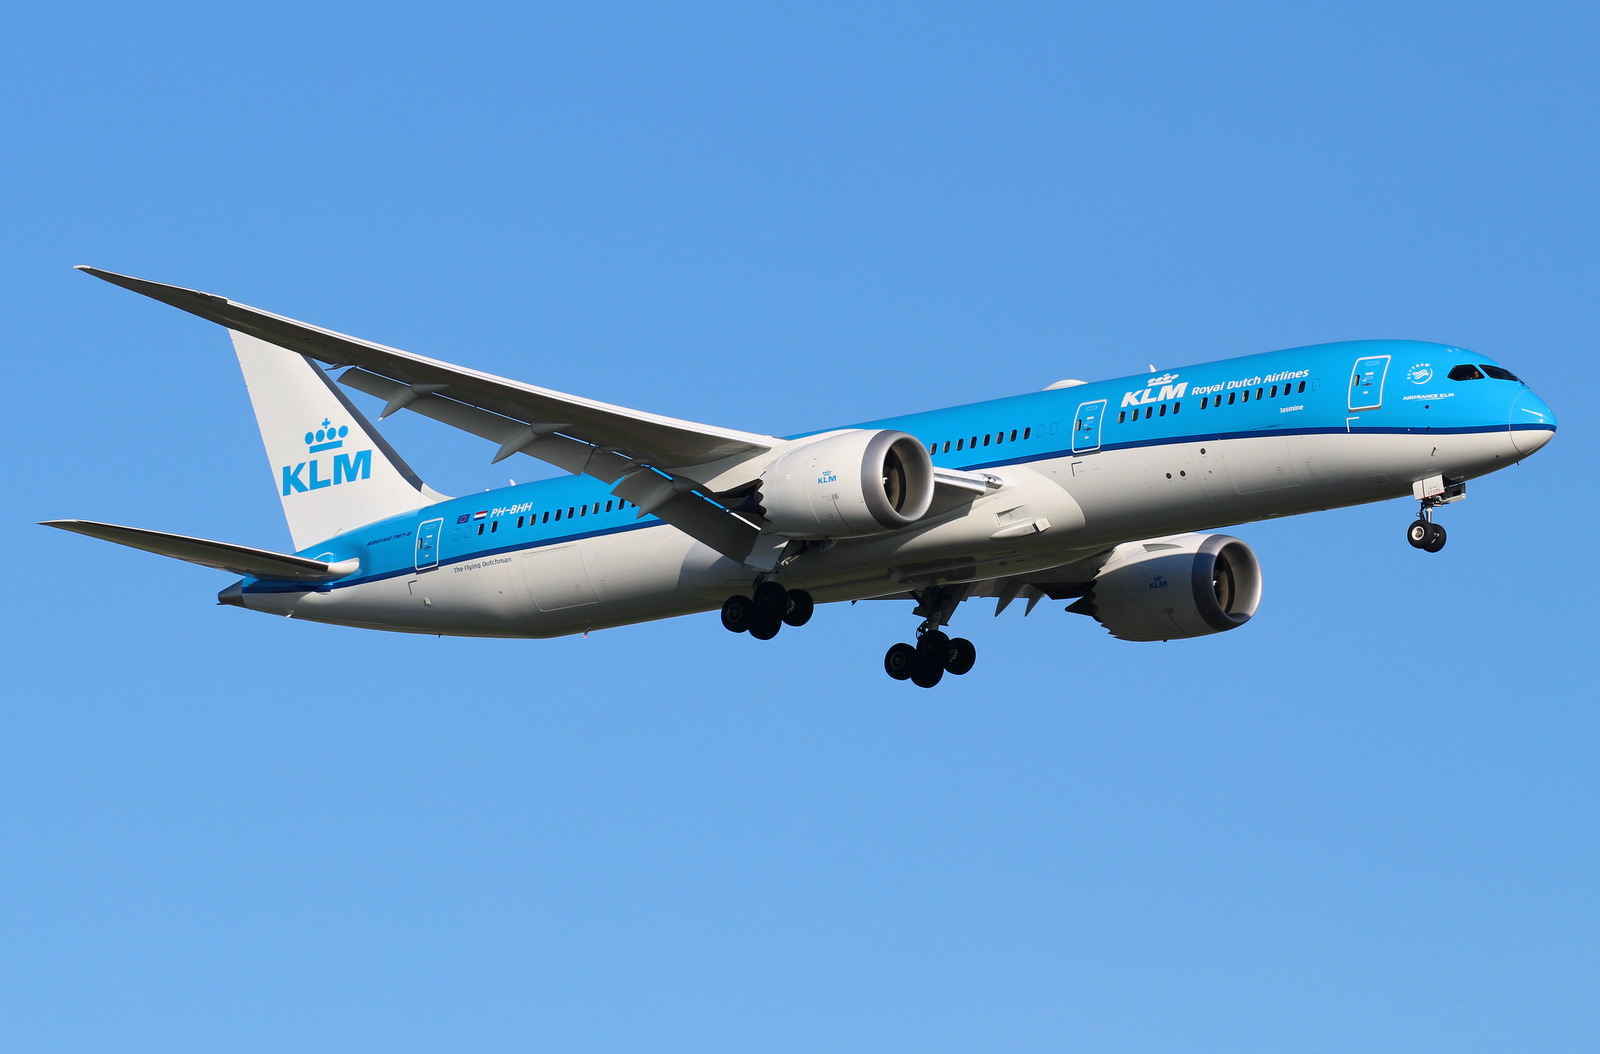 Boeing 7879 Dreamliner KLM. Photos and description of the